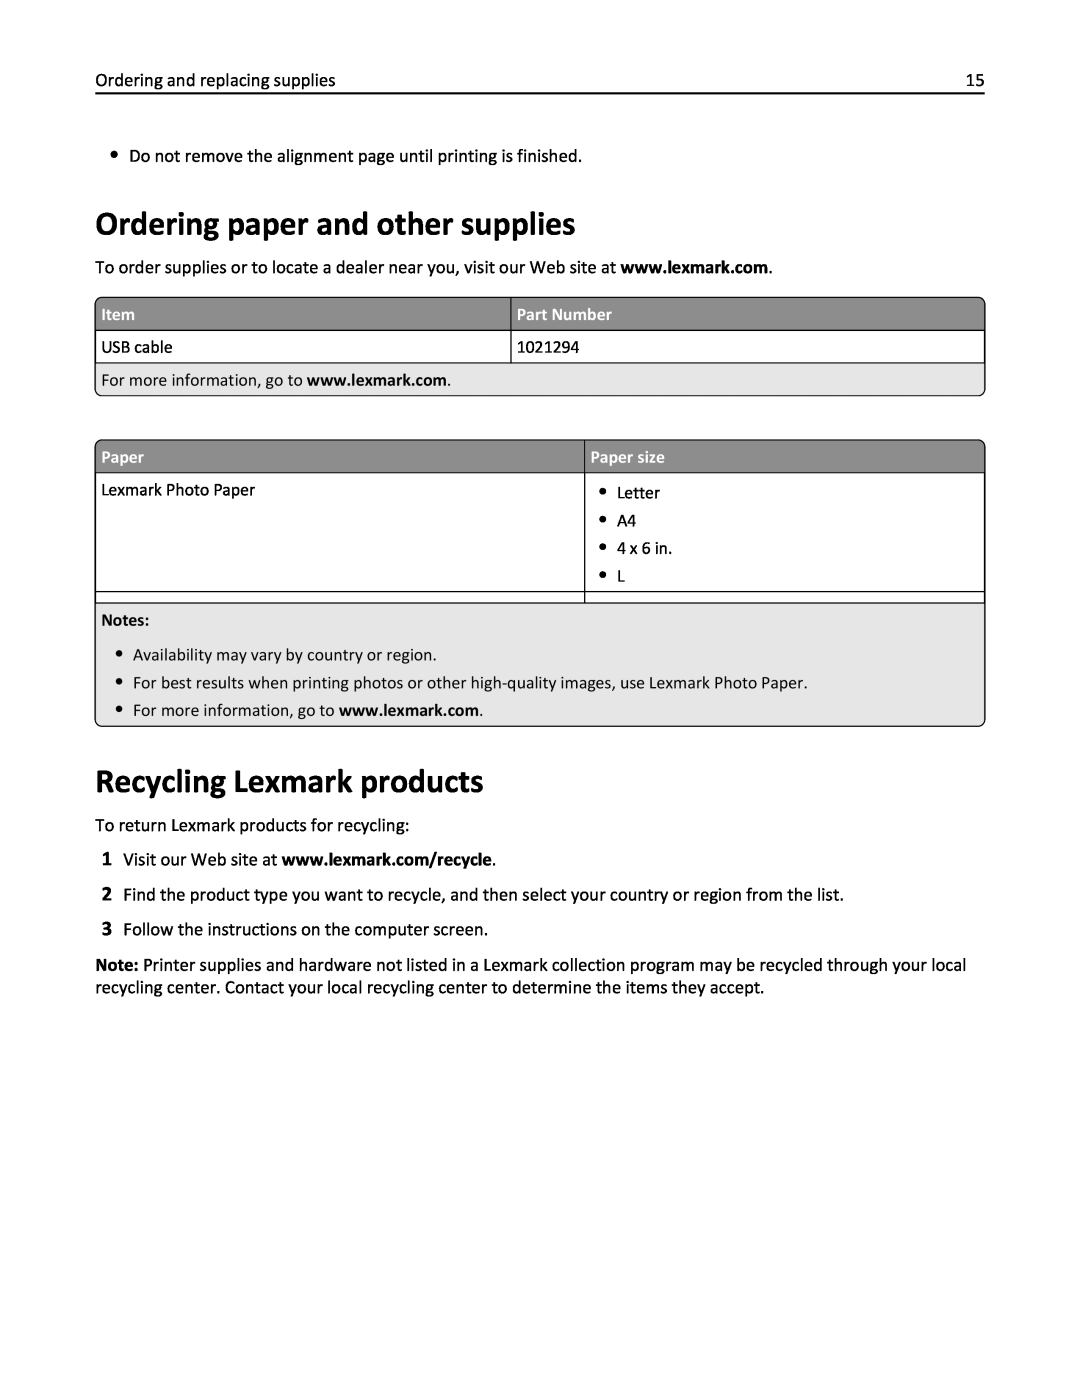 Lexmark 200, 20E manual Ordering paper and other supplies, Recycling Lexmark products 